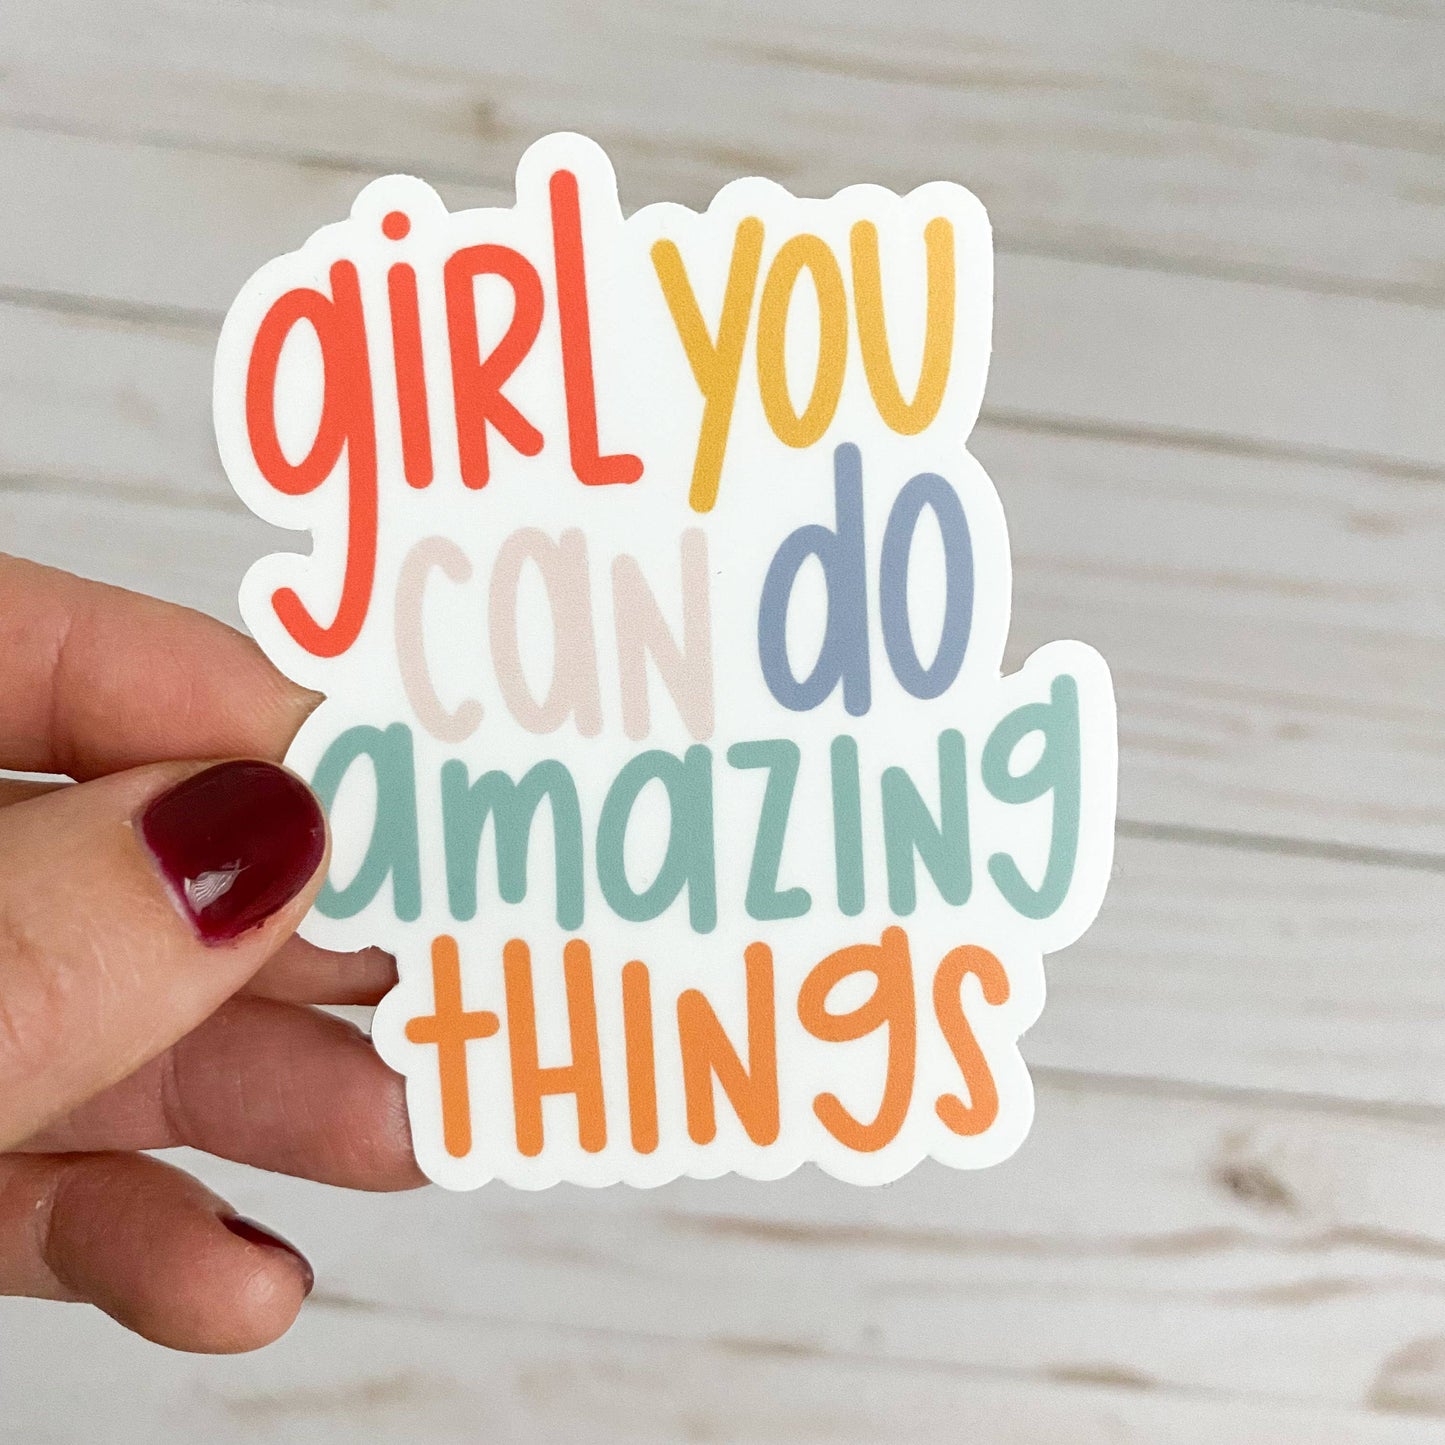 Girl you can do amazing things sticker *FREE SHIPPING with any order over $10